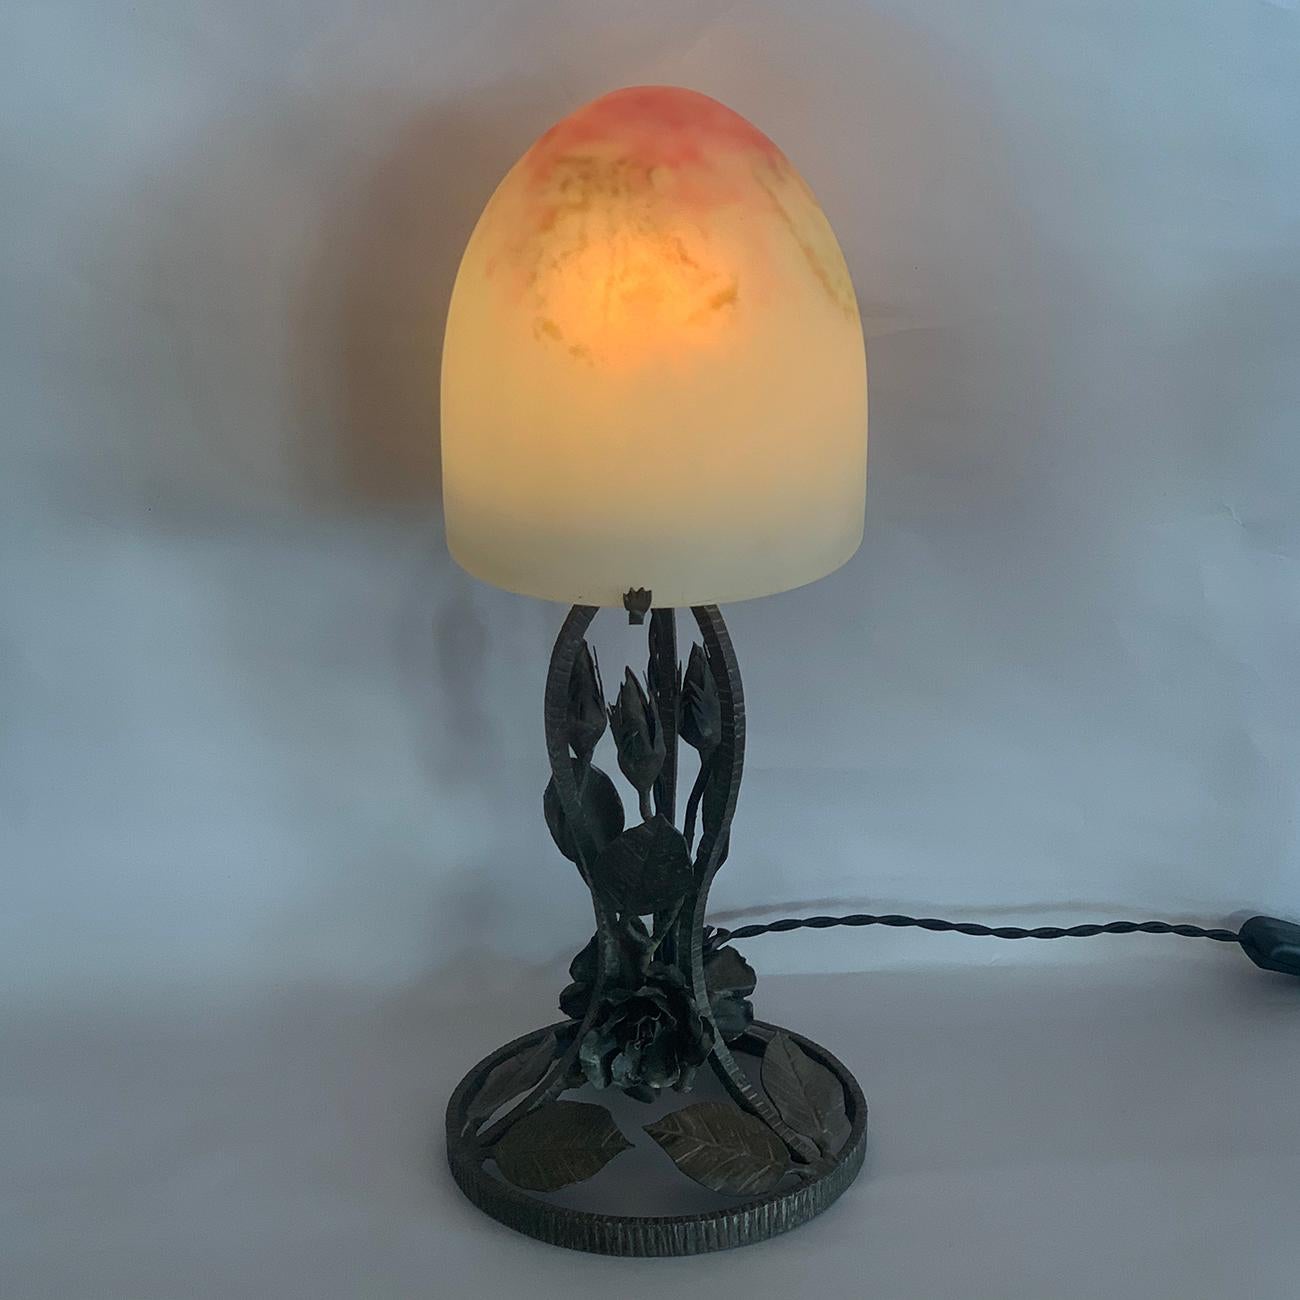 Art Deco French Pate De Verre Dome Lamp Signed Crespin In Good Condition For Sale In Daylesford, Victoria